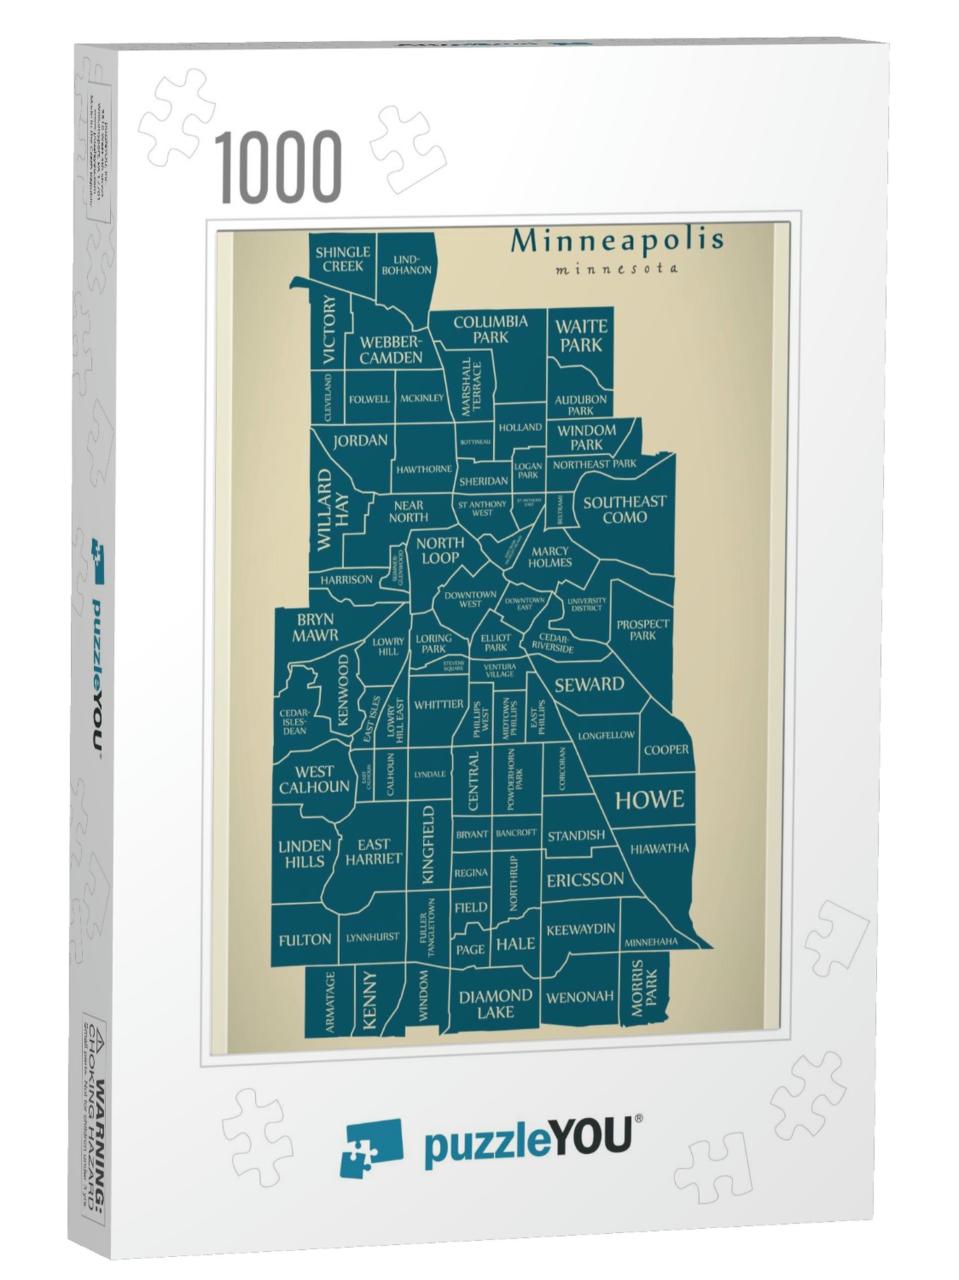 Modern City Map - Minneapolis Minnesota City of the USA wi... Jigsaw Puzzle with 1000 pieces